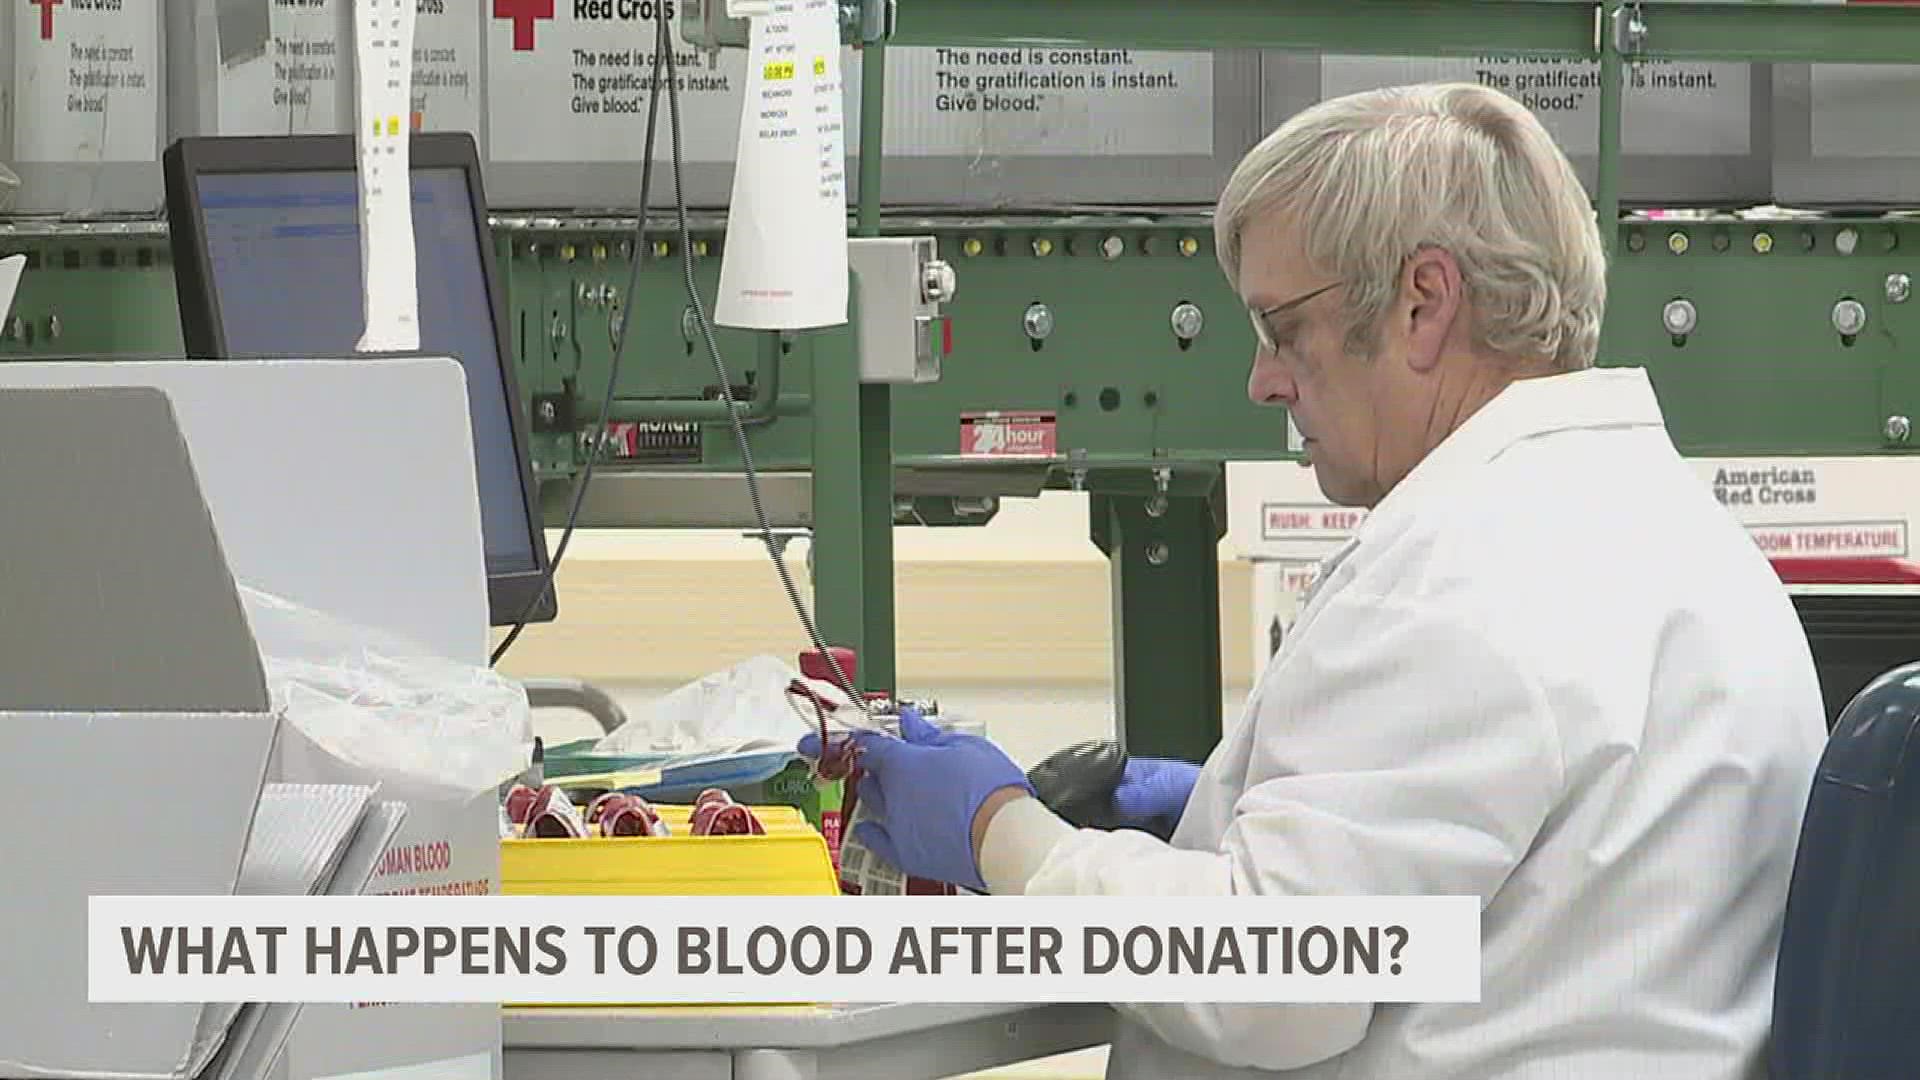 After the blood is processed, it’s ready to be shipped, with rare blood even going across the country.